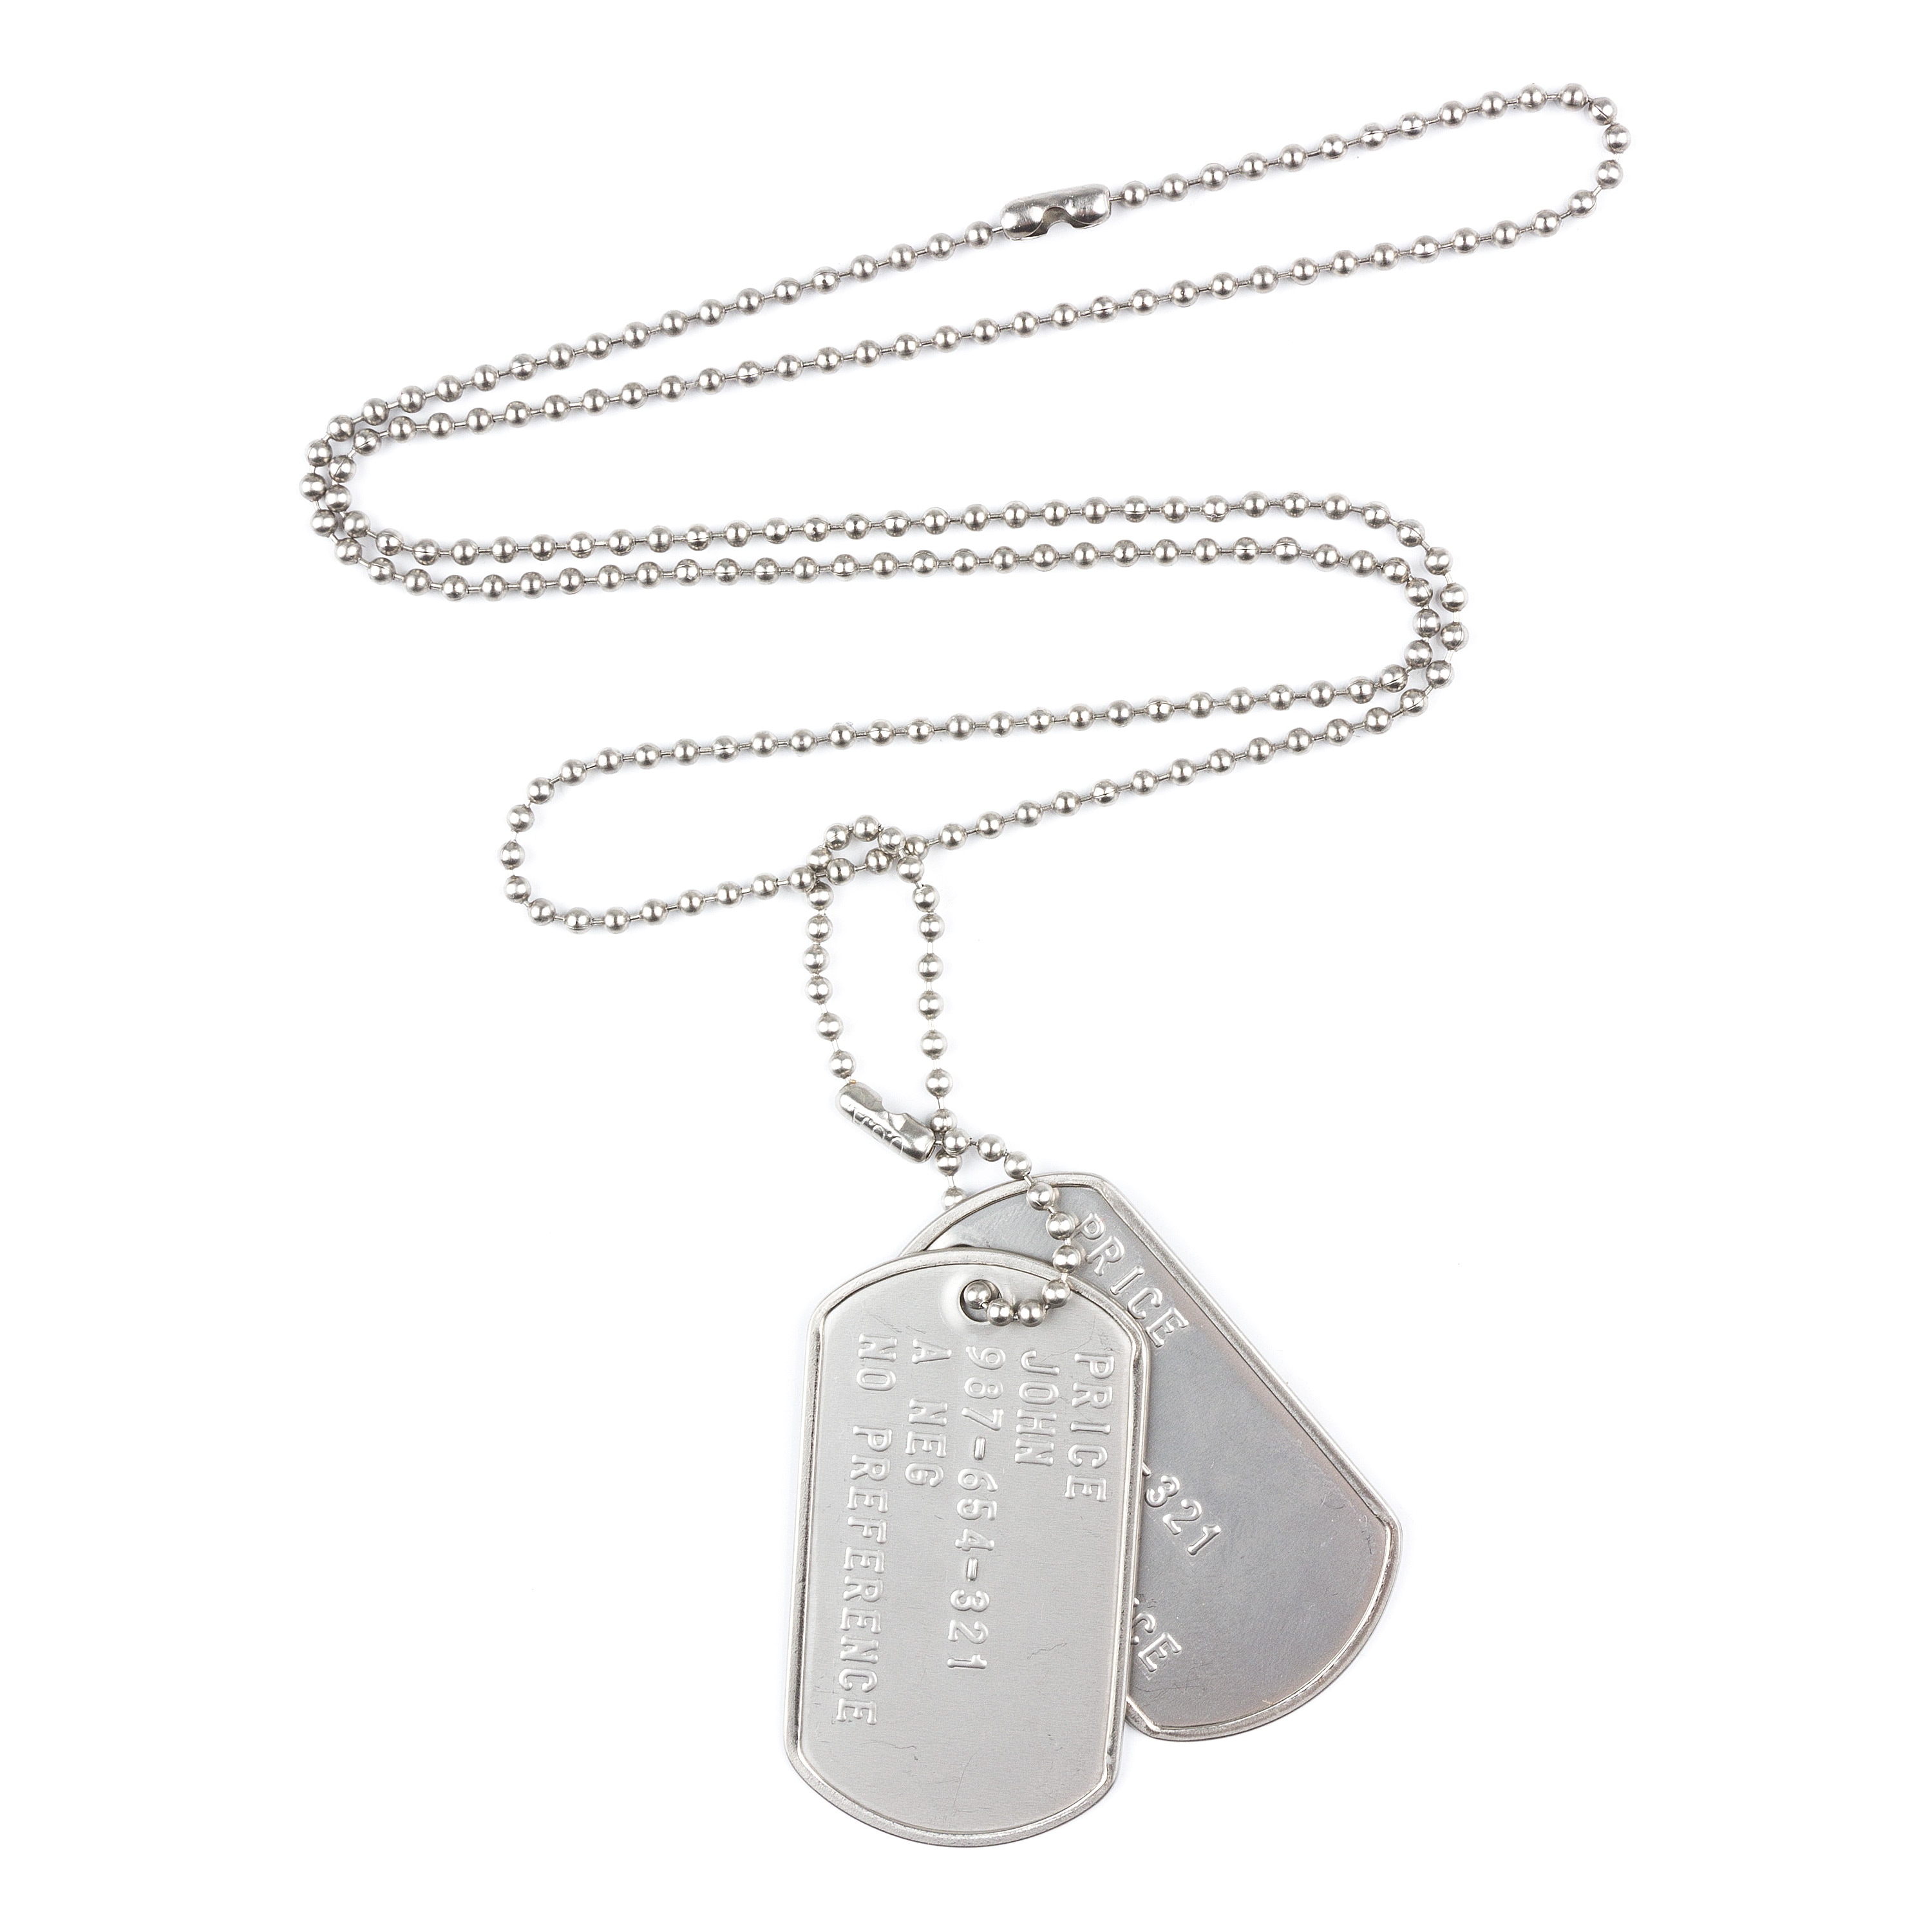 soep Scheermes Buiten adem Purchase the US Dog Tags Without Silencer silver color by ASMC